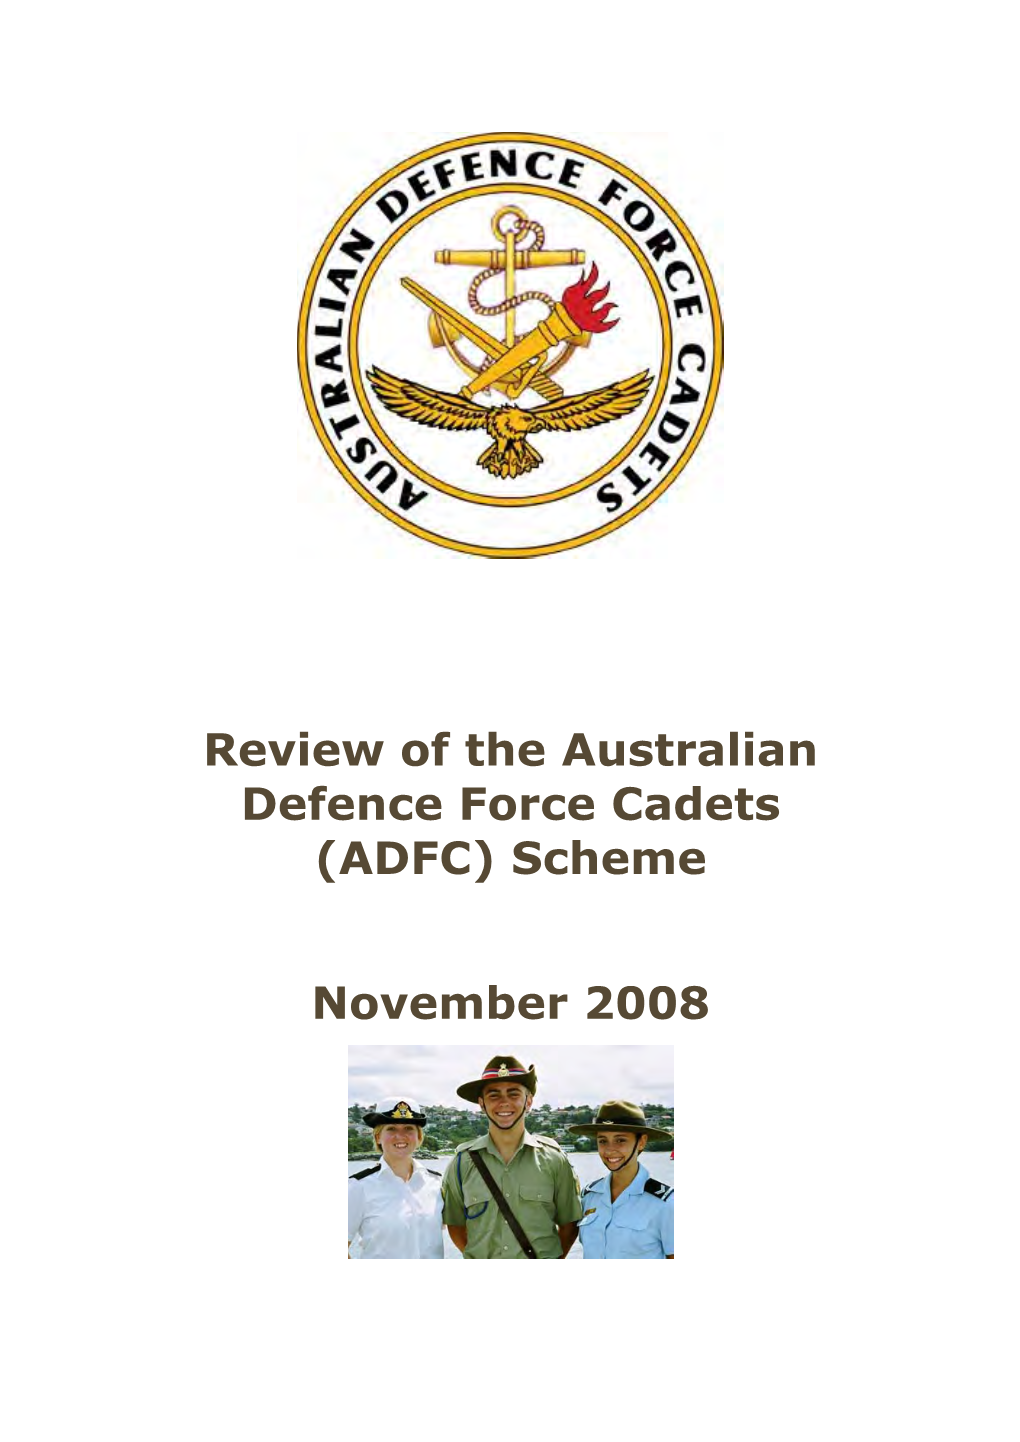 Review of the Australian Defence Force Cadets (ADFC) Scheme